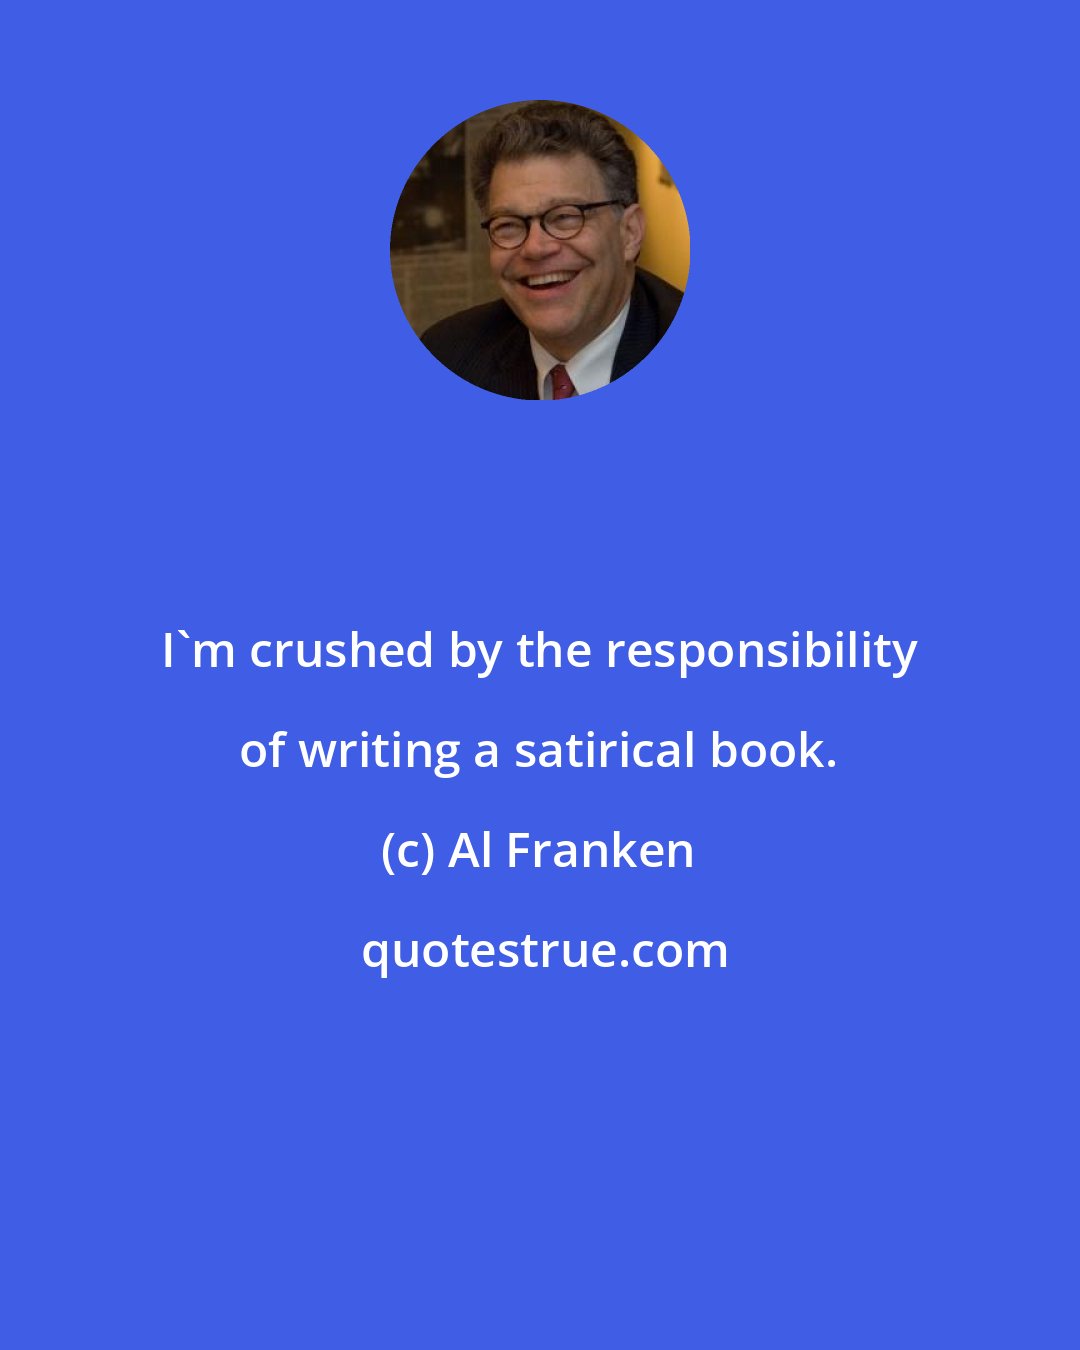 Al Franken: I'm crushed by the responsibility of writing a satirical book.